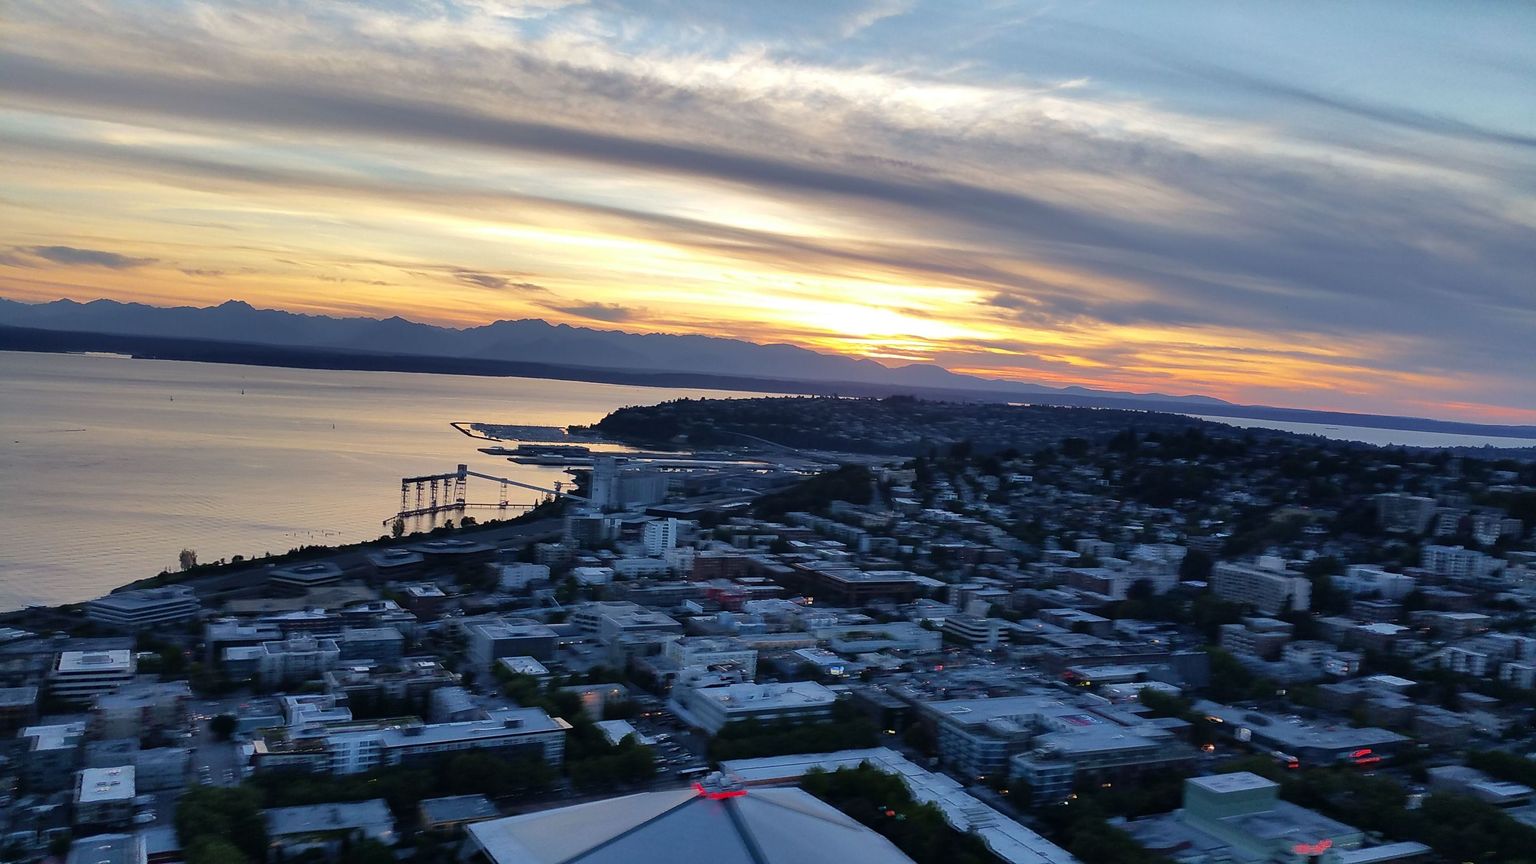 Spectacular sunset from the Space Needle